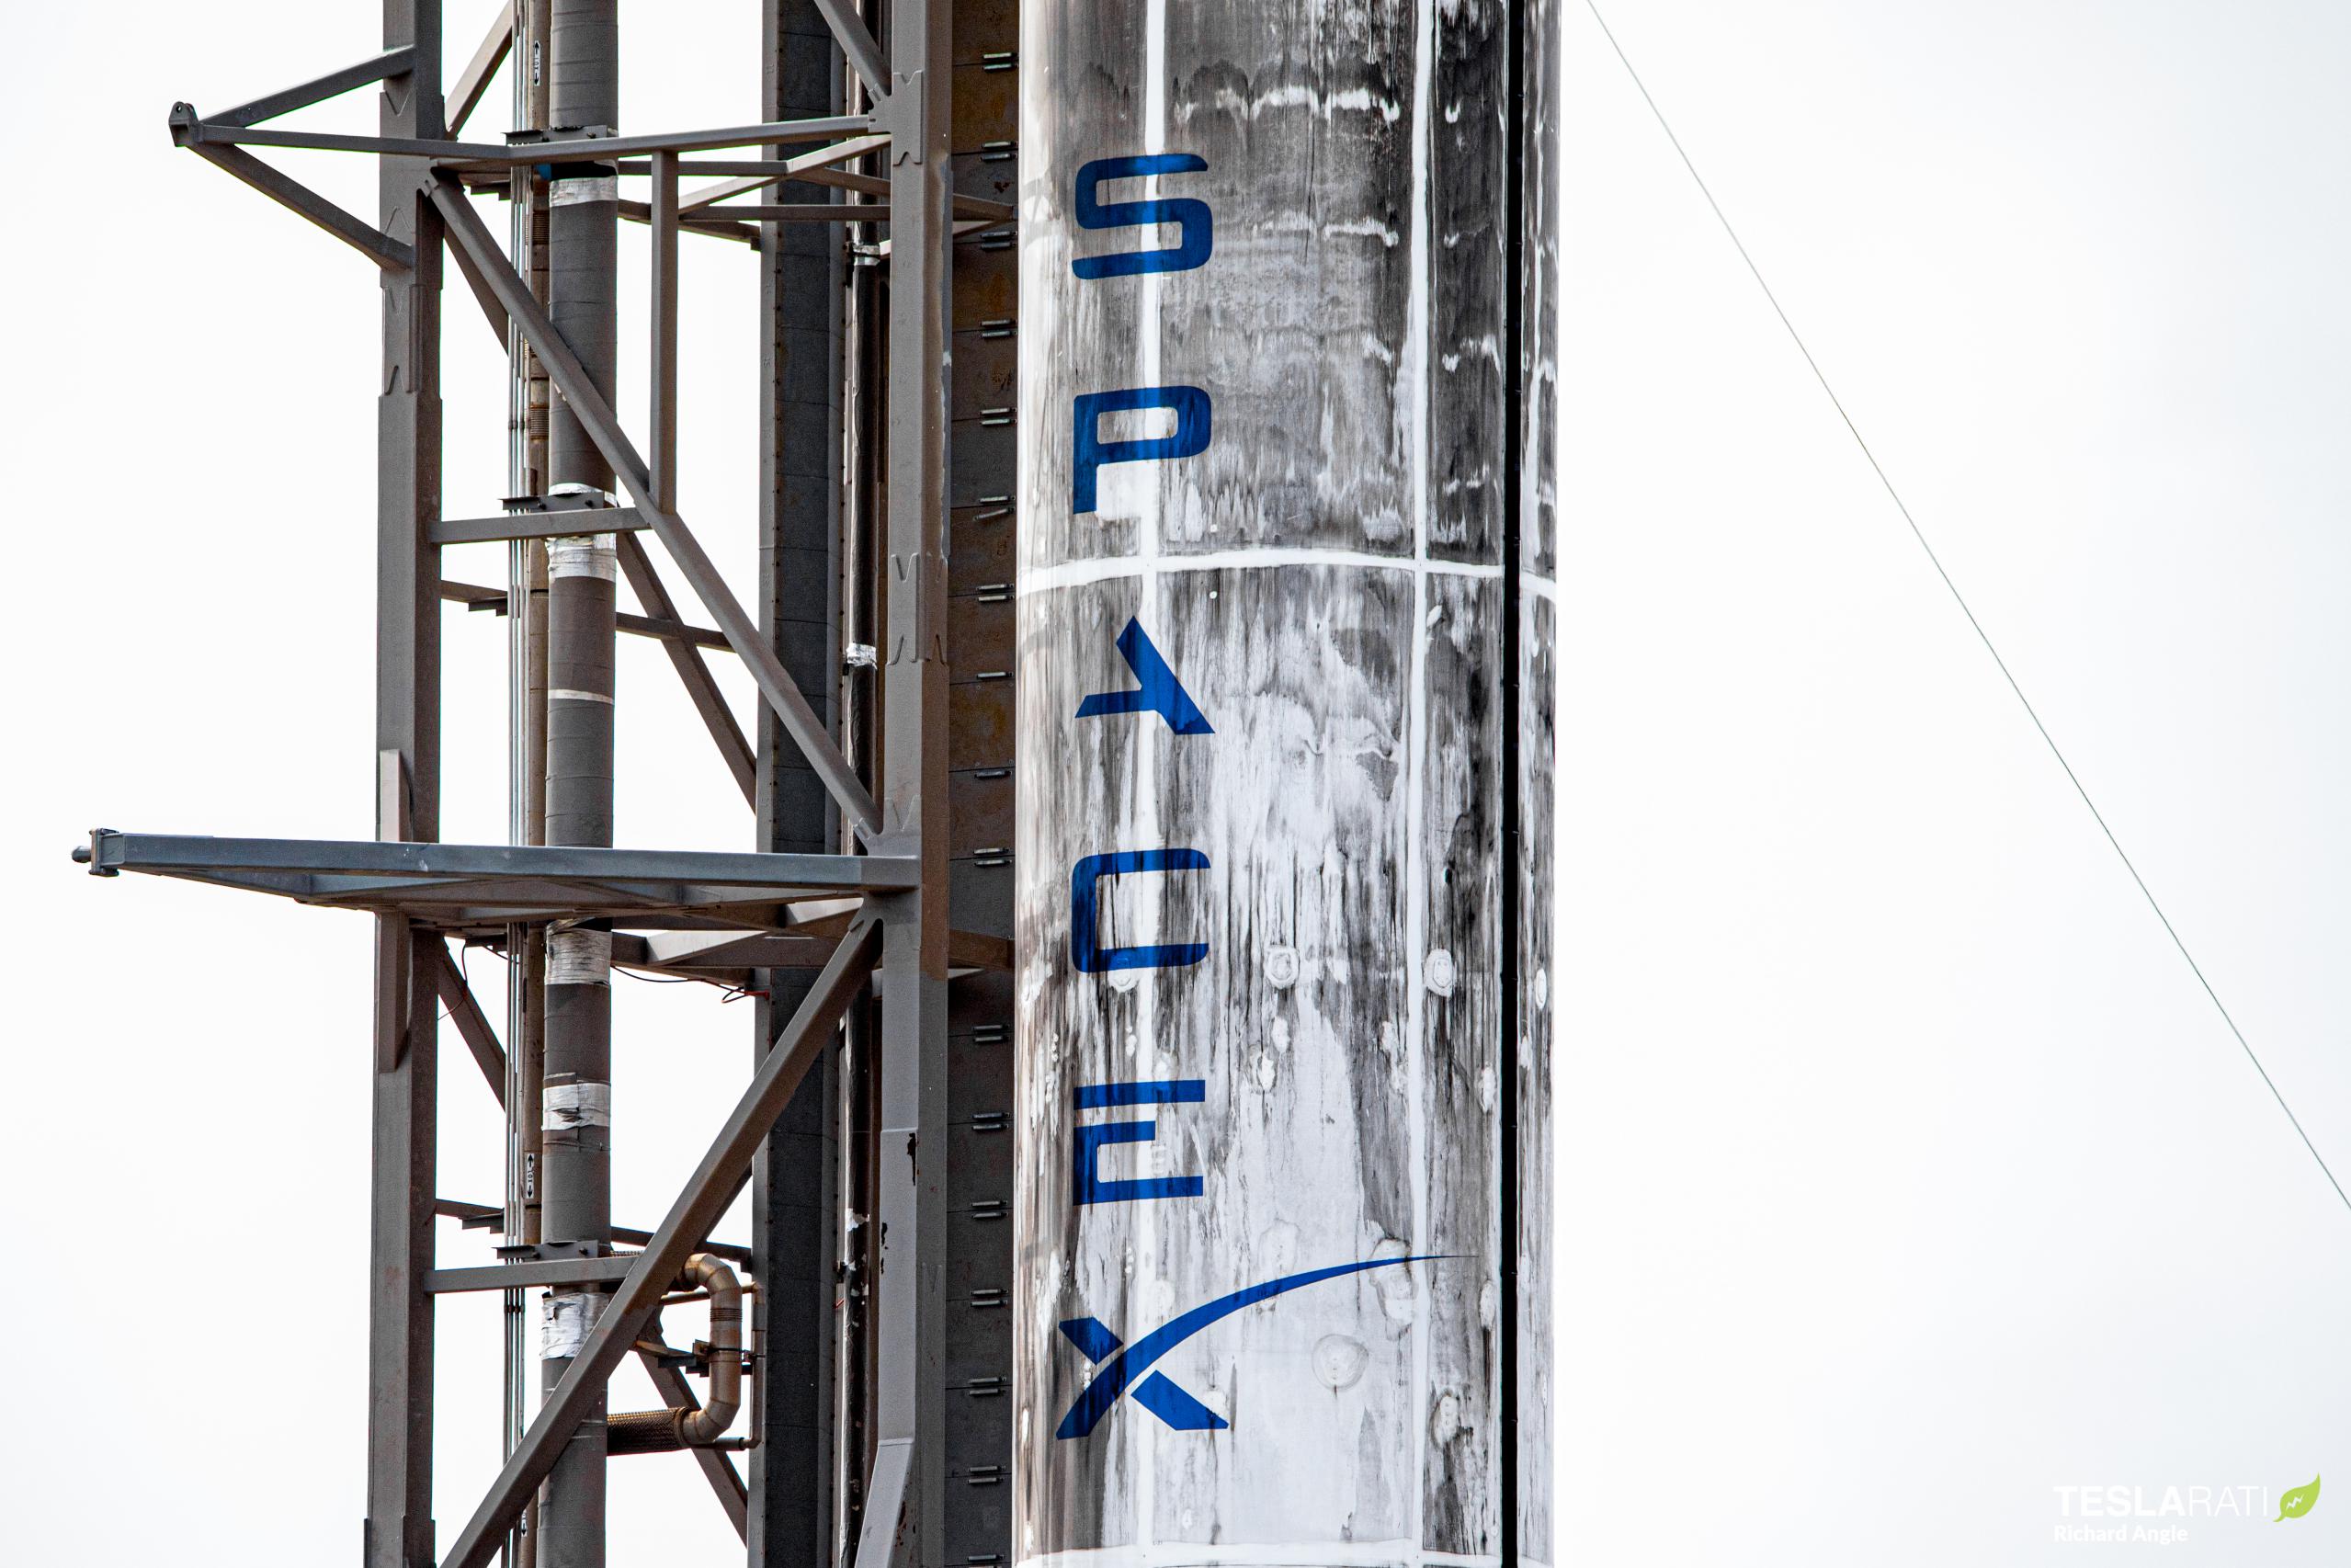 SpaceX already raising Falcon 9 rocket vertical for next Starlink launch News image 